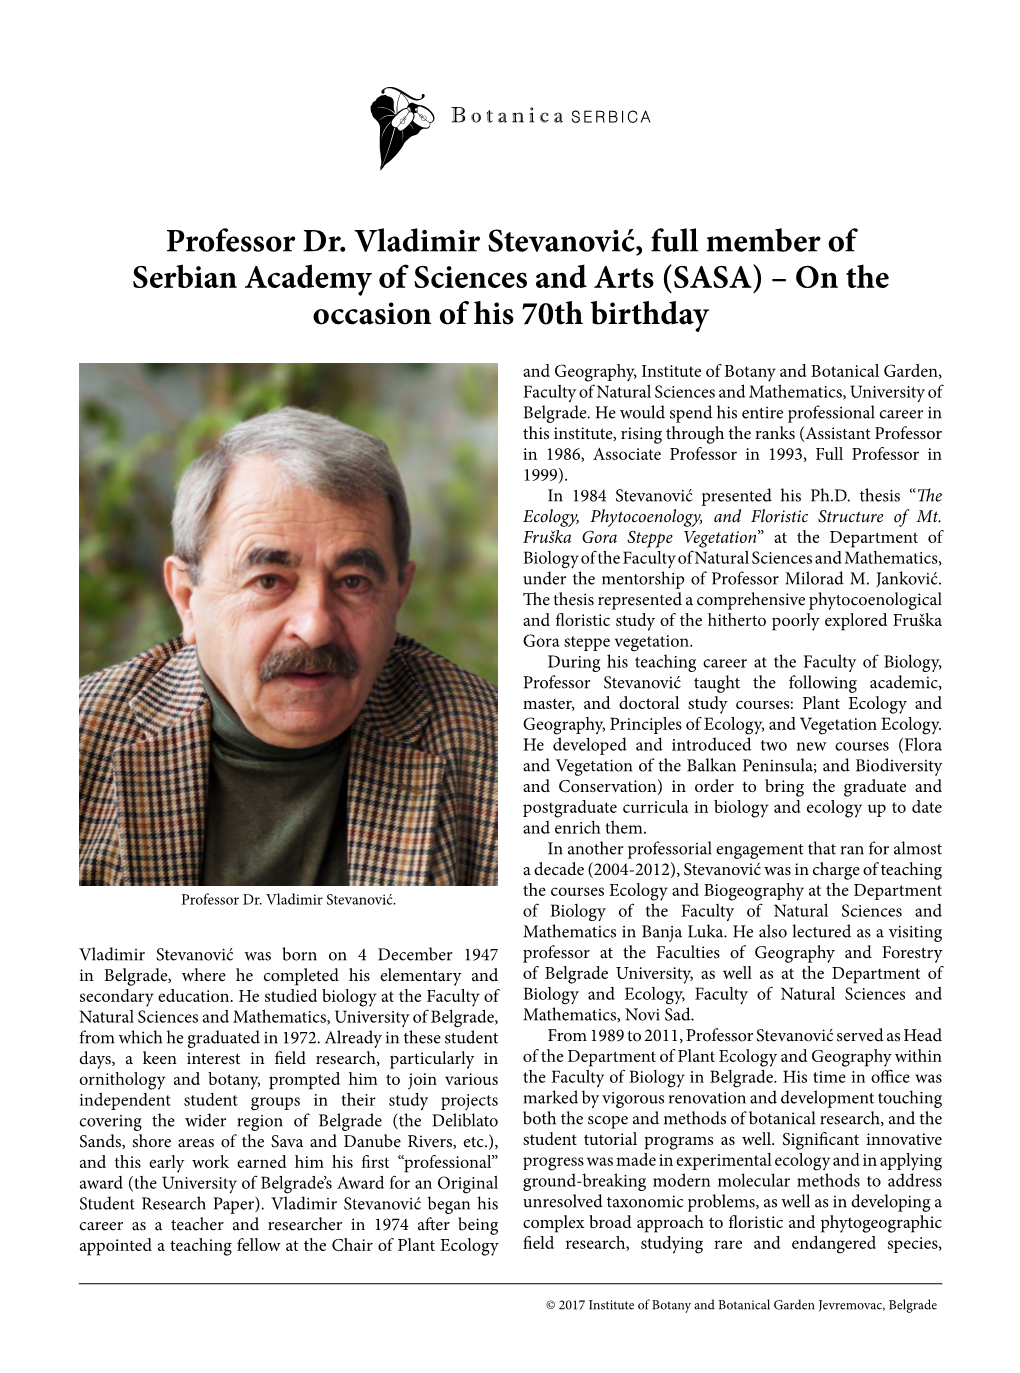 Professor Dr. Vladimir Stevanović, Full Member of Serbian Academy of Sciences and Arts (SASA) – on the Occasion of His 70Th Birthday